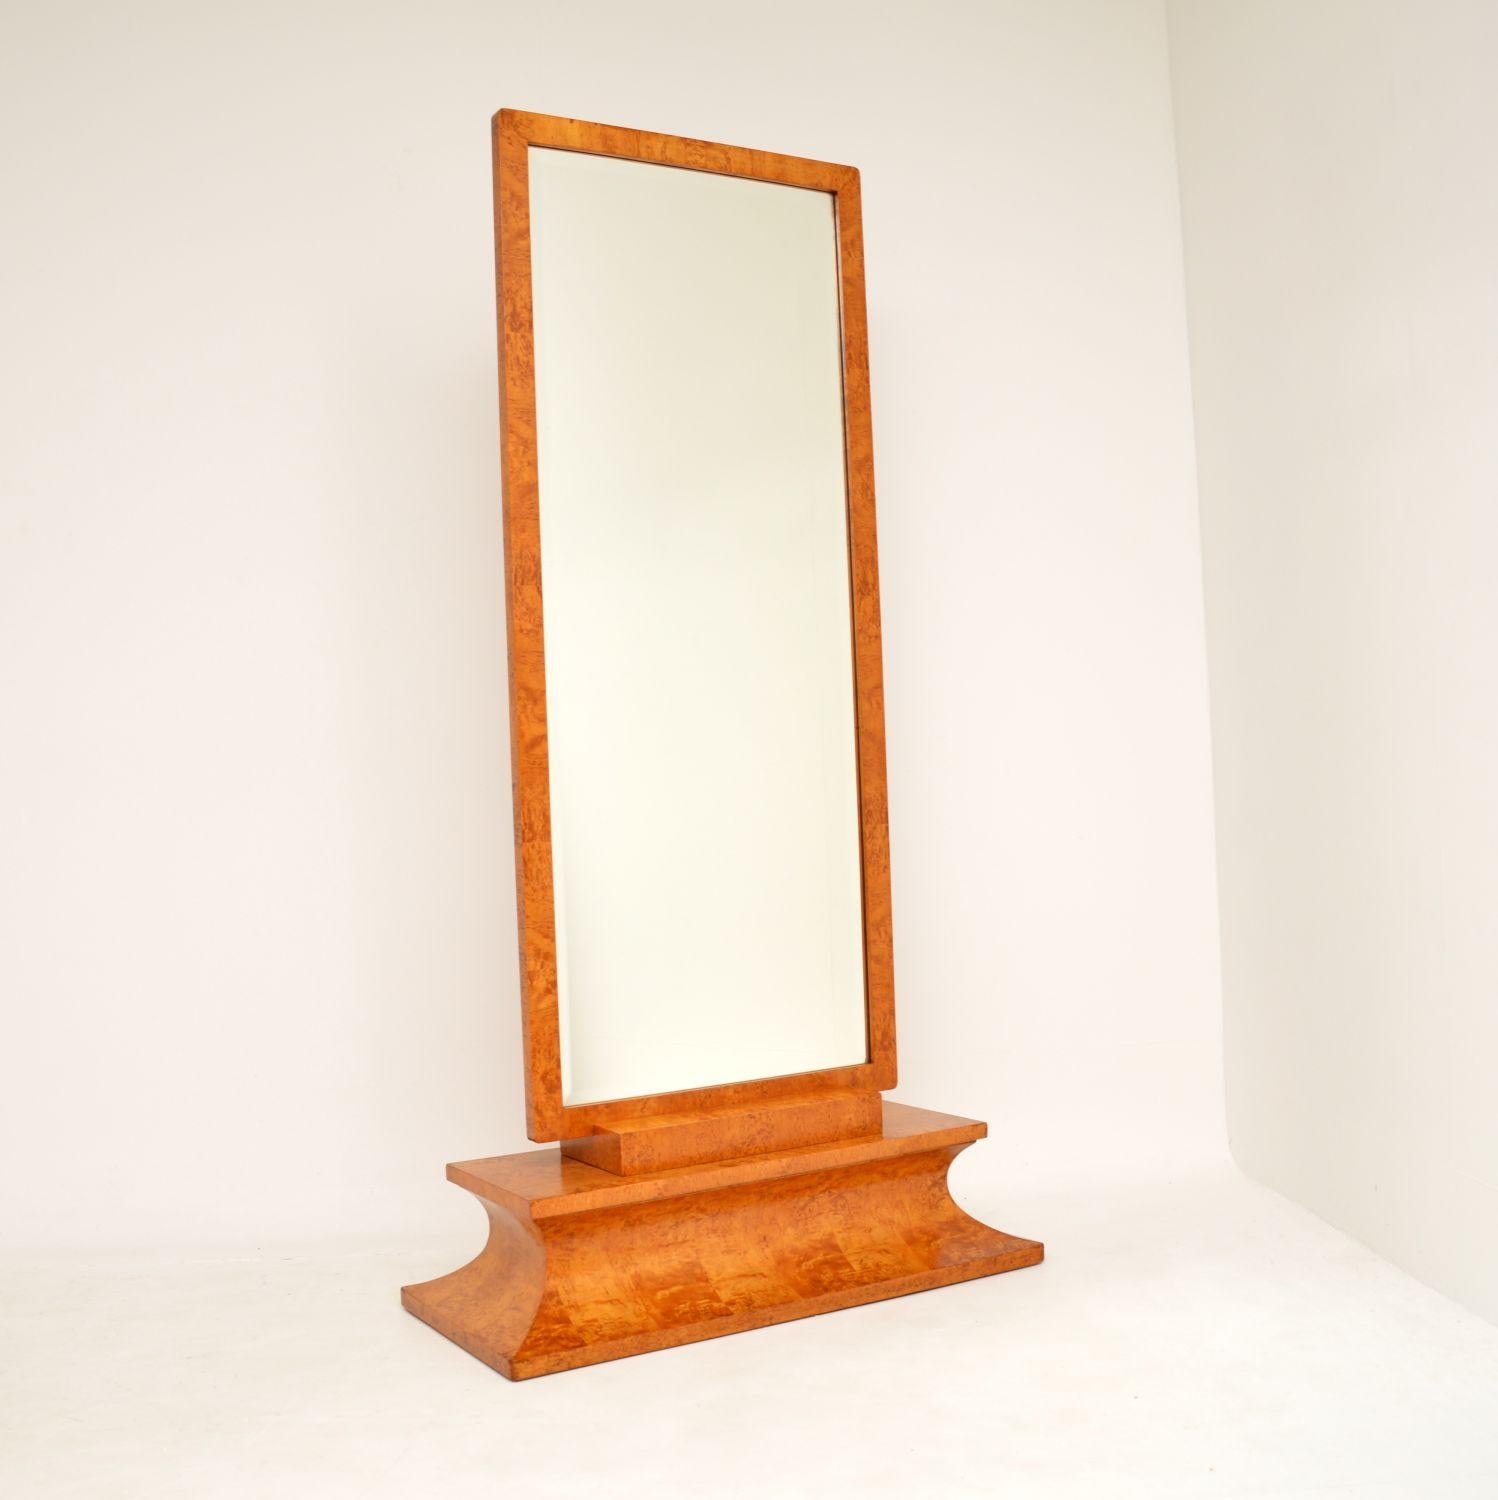 An absolutely stunning original Art Deco period free standing cheval mirror in birds eye maple. This was made in continental Europe, most likely Sweden. It was retailed in Harvey Nichols and has the original label, this dates from the